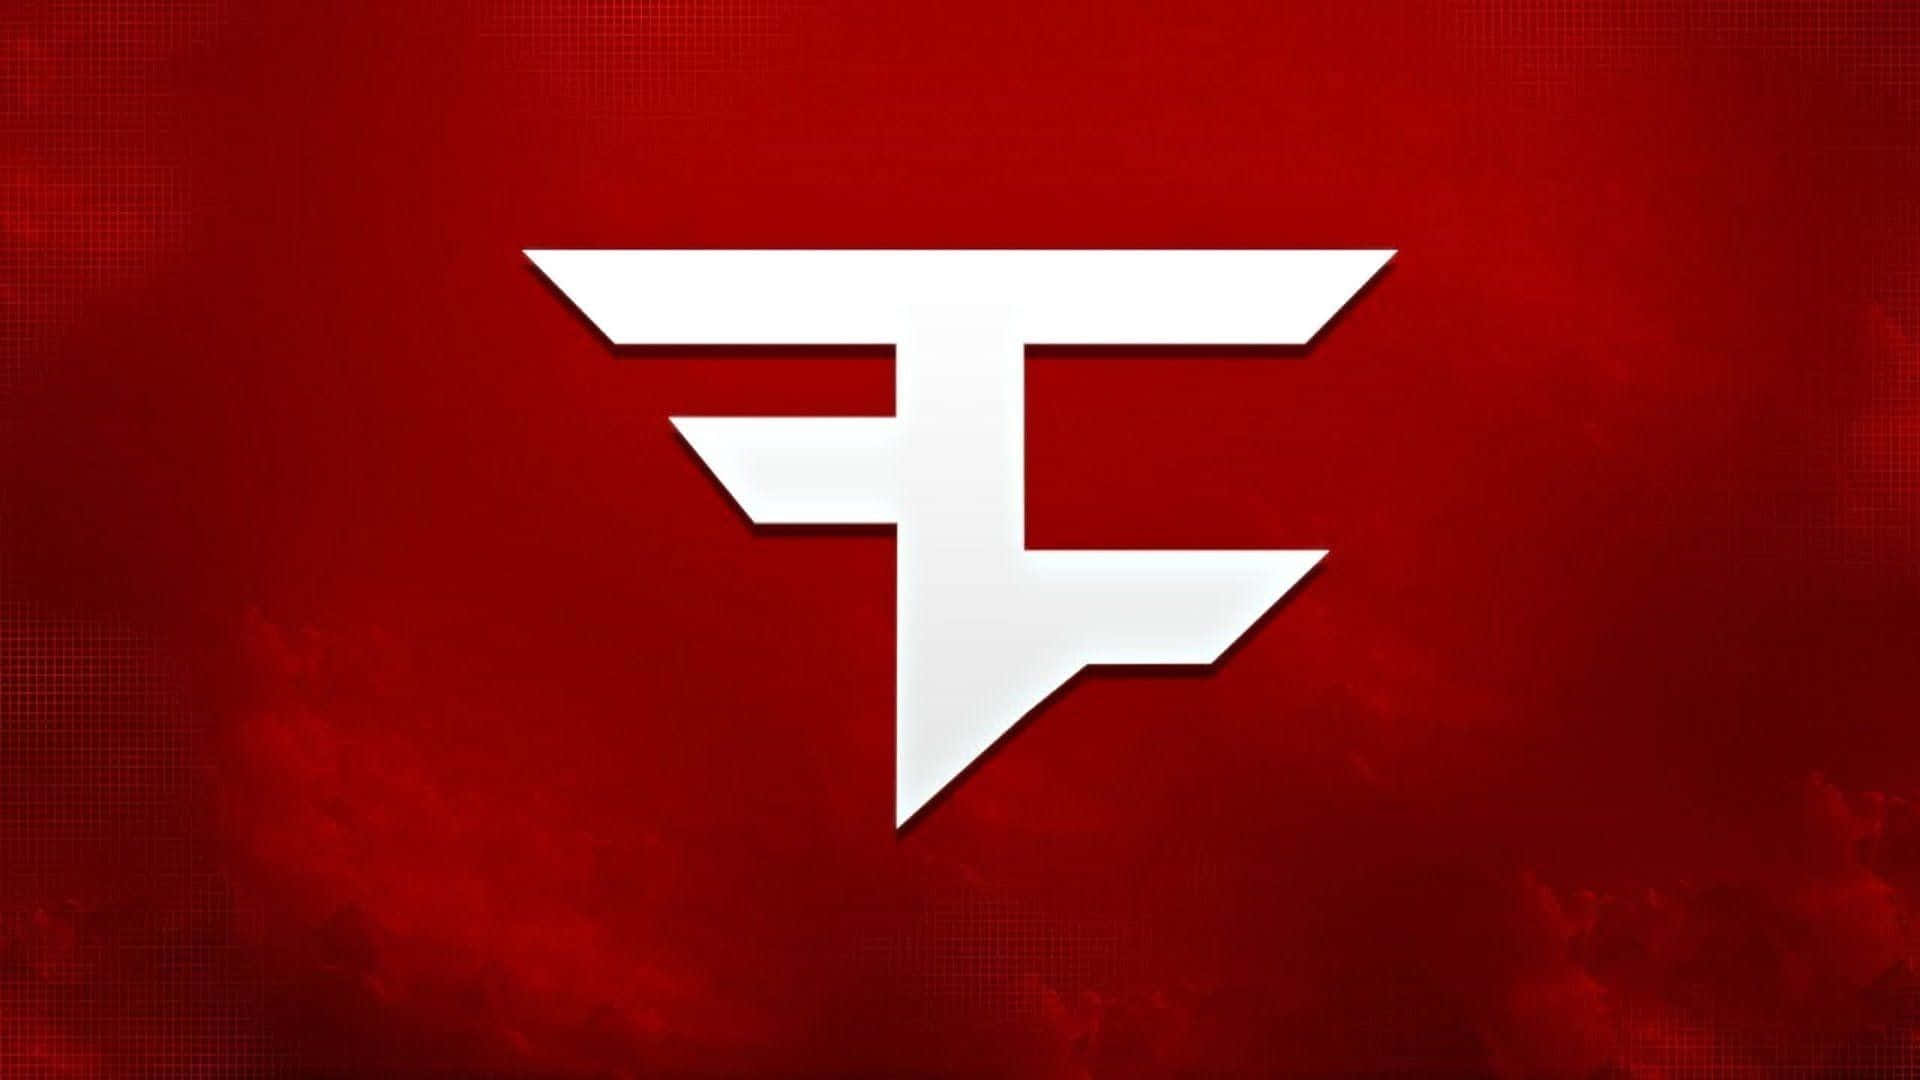 Faze Rug Red And White Background